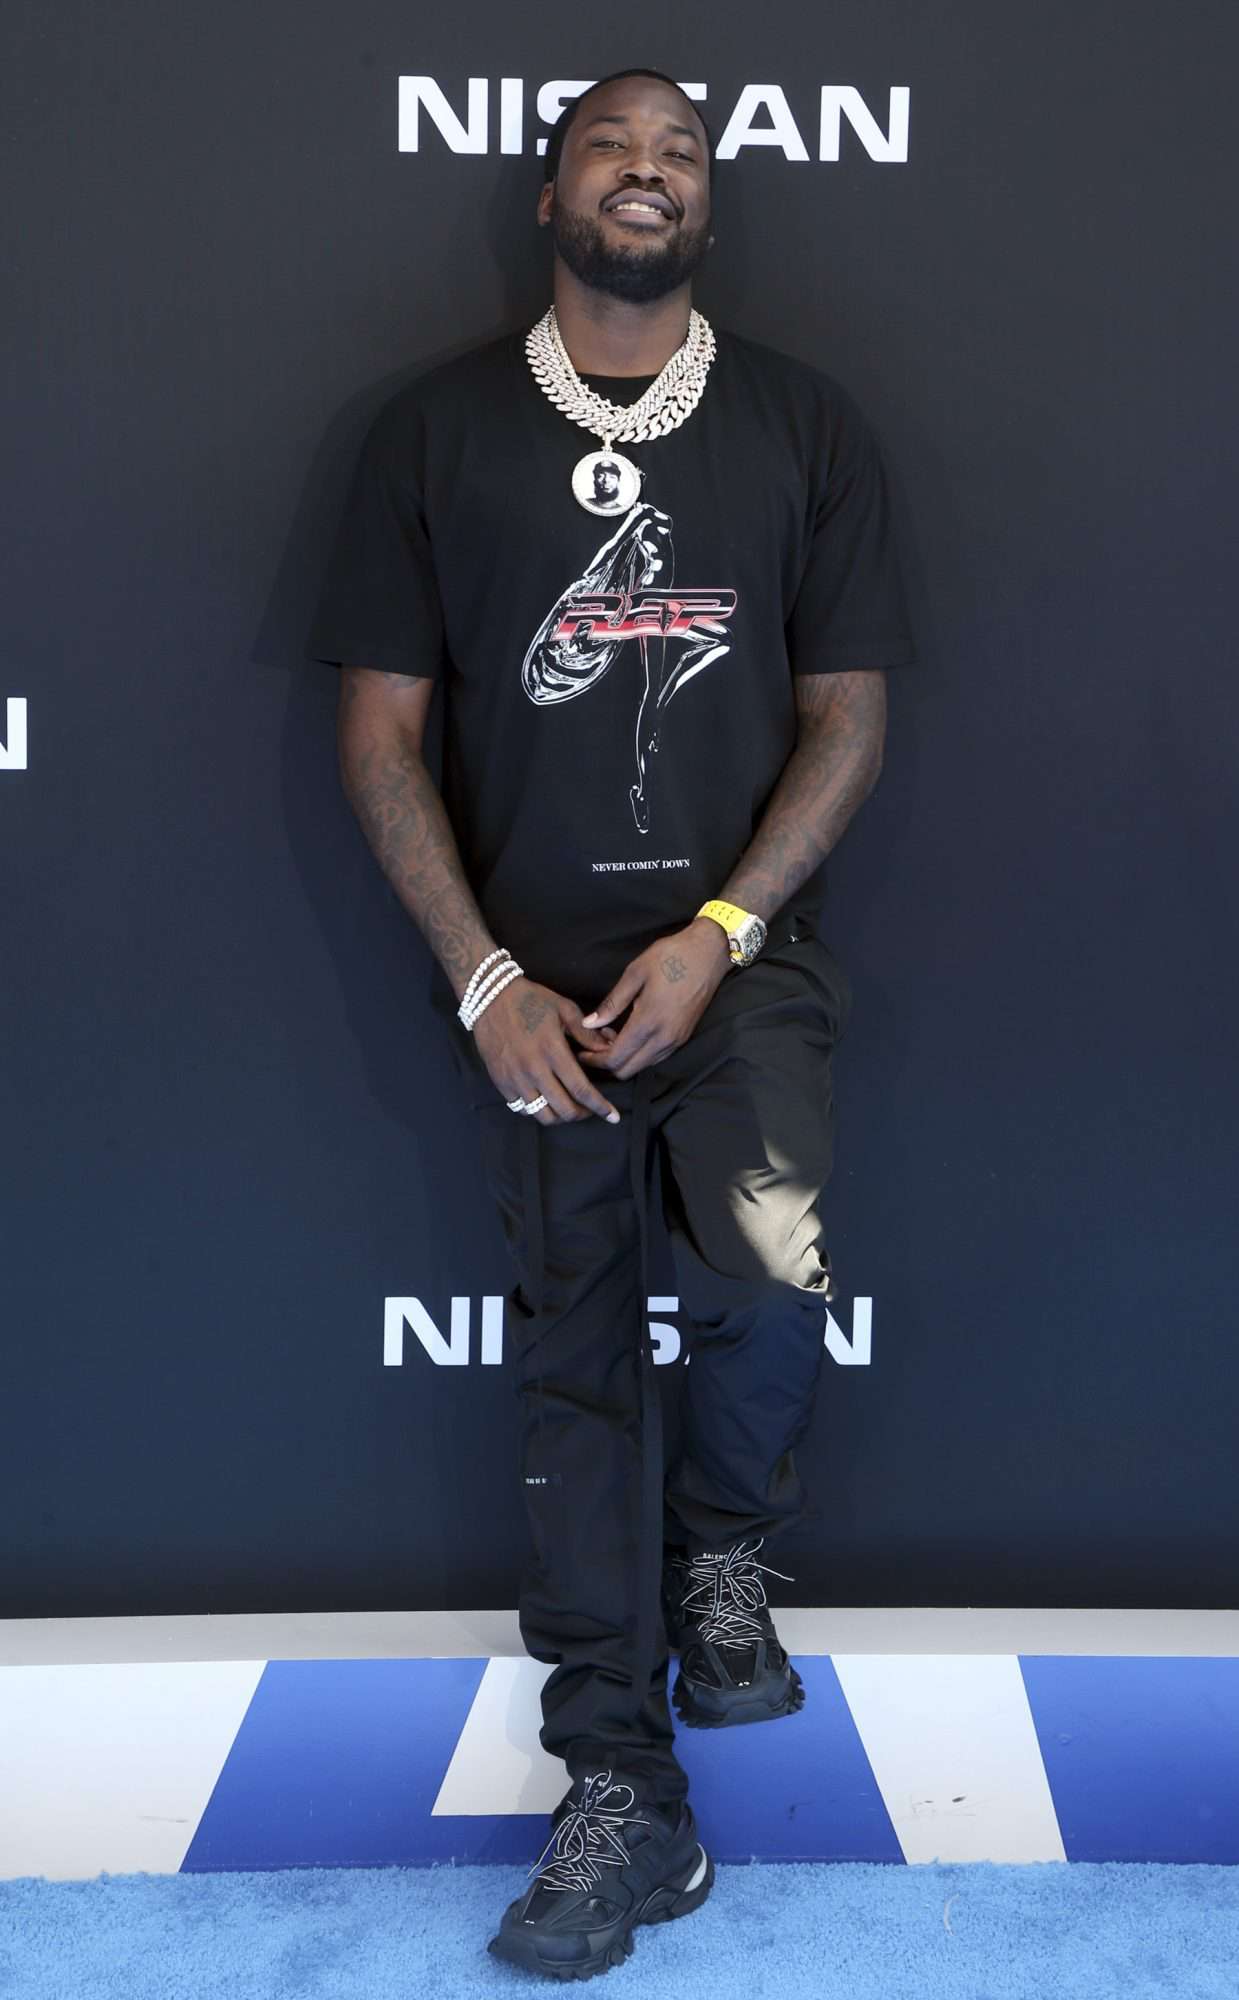 Mandatory Credit: Photo by MediaPunch/Shutterstock (10320014f) Meek Mill BET Awards, Arrivals, Microsoft Theater, Los Angeles, USA - 23 Jun 2019